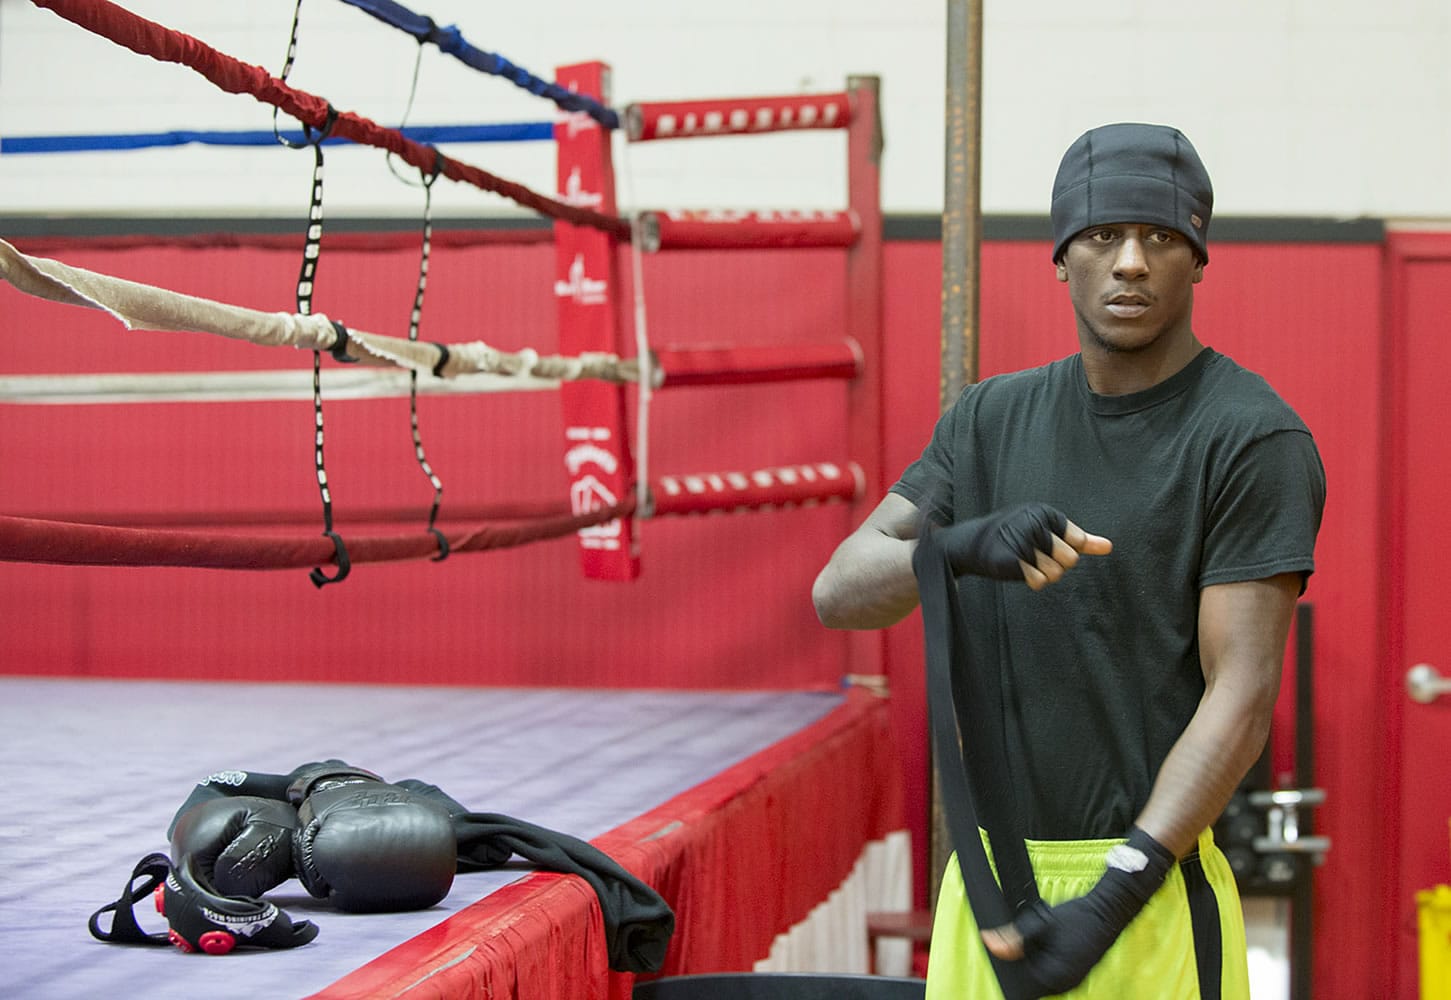 Professional boxer Virgil Green of Vancouver, pictured in December 2015 at Fisticuffs Gym, is slated to fight in a main event on June 11 in Tacoma .